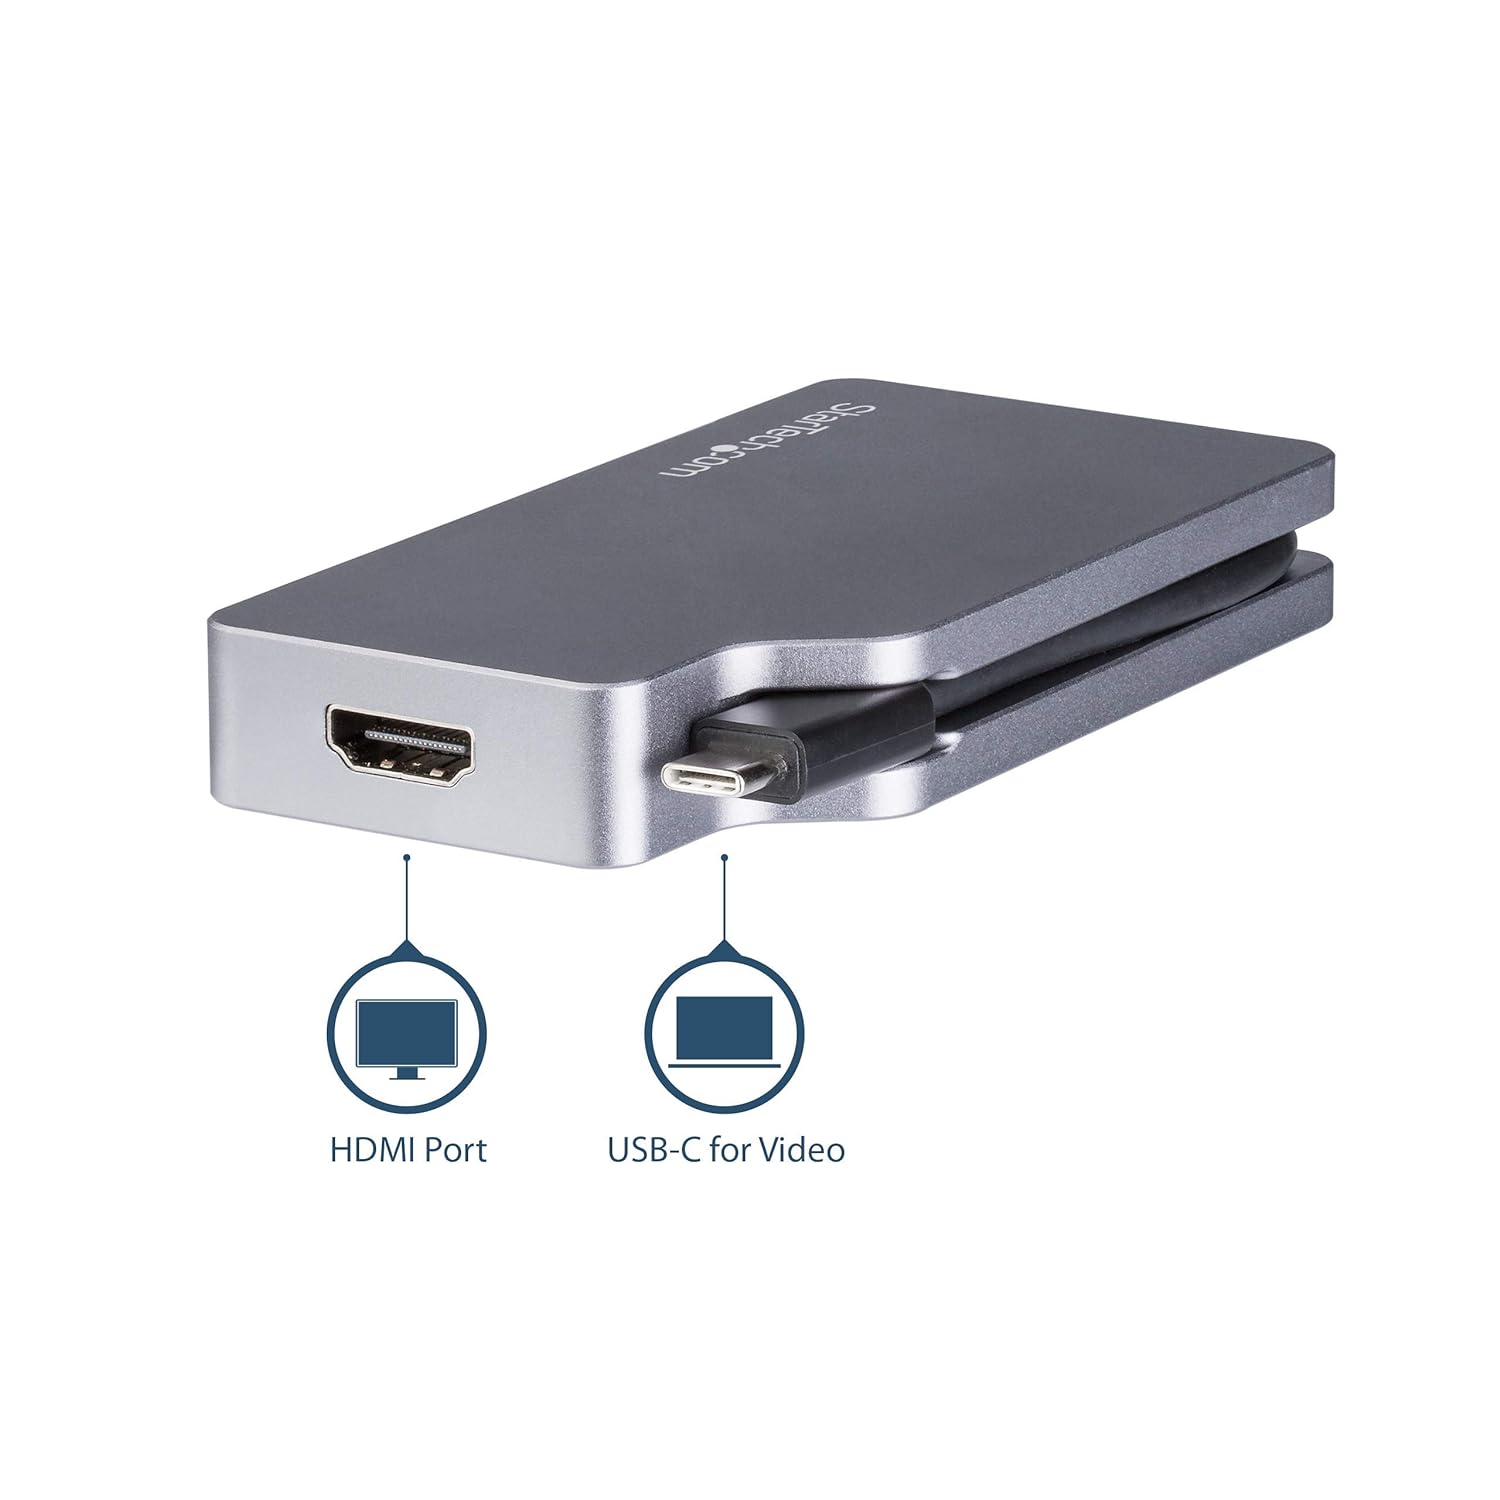 StarTech.com USB C Multiport Video Adapter - Space Gray - USB C to VGA/DVI / HDMI/mDP - 4K USB C Adapter - USB C to HDMI Adapter